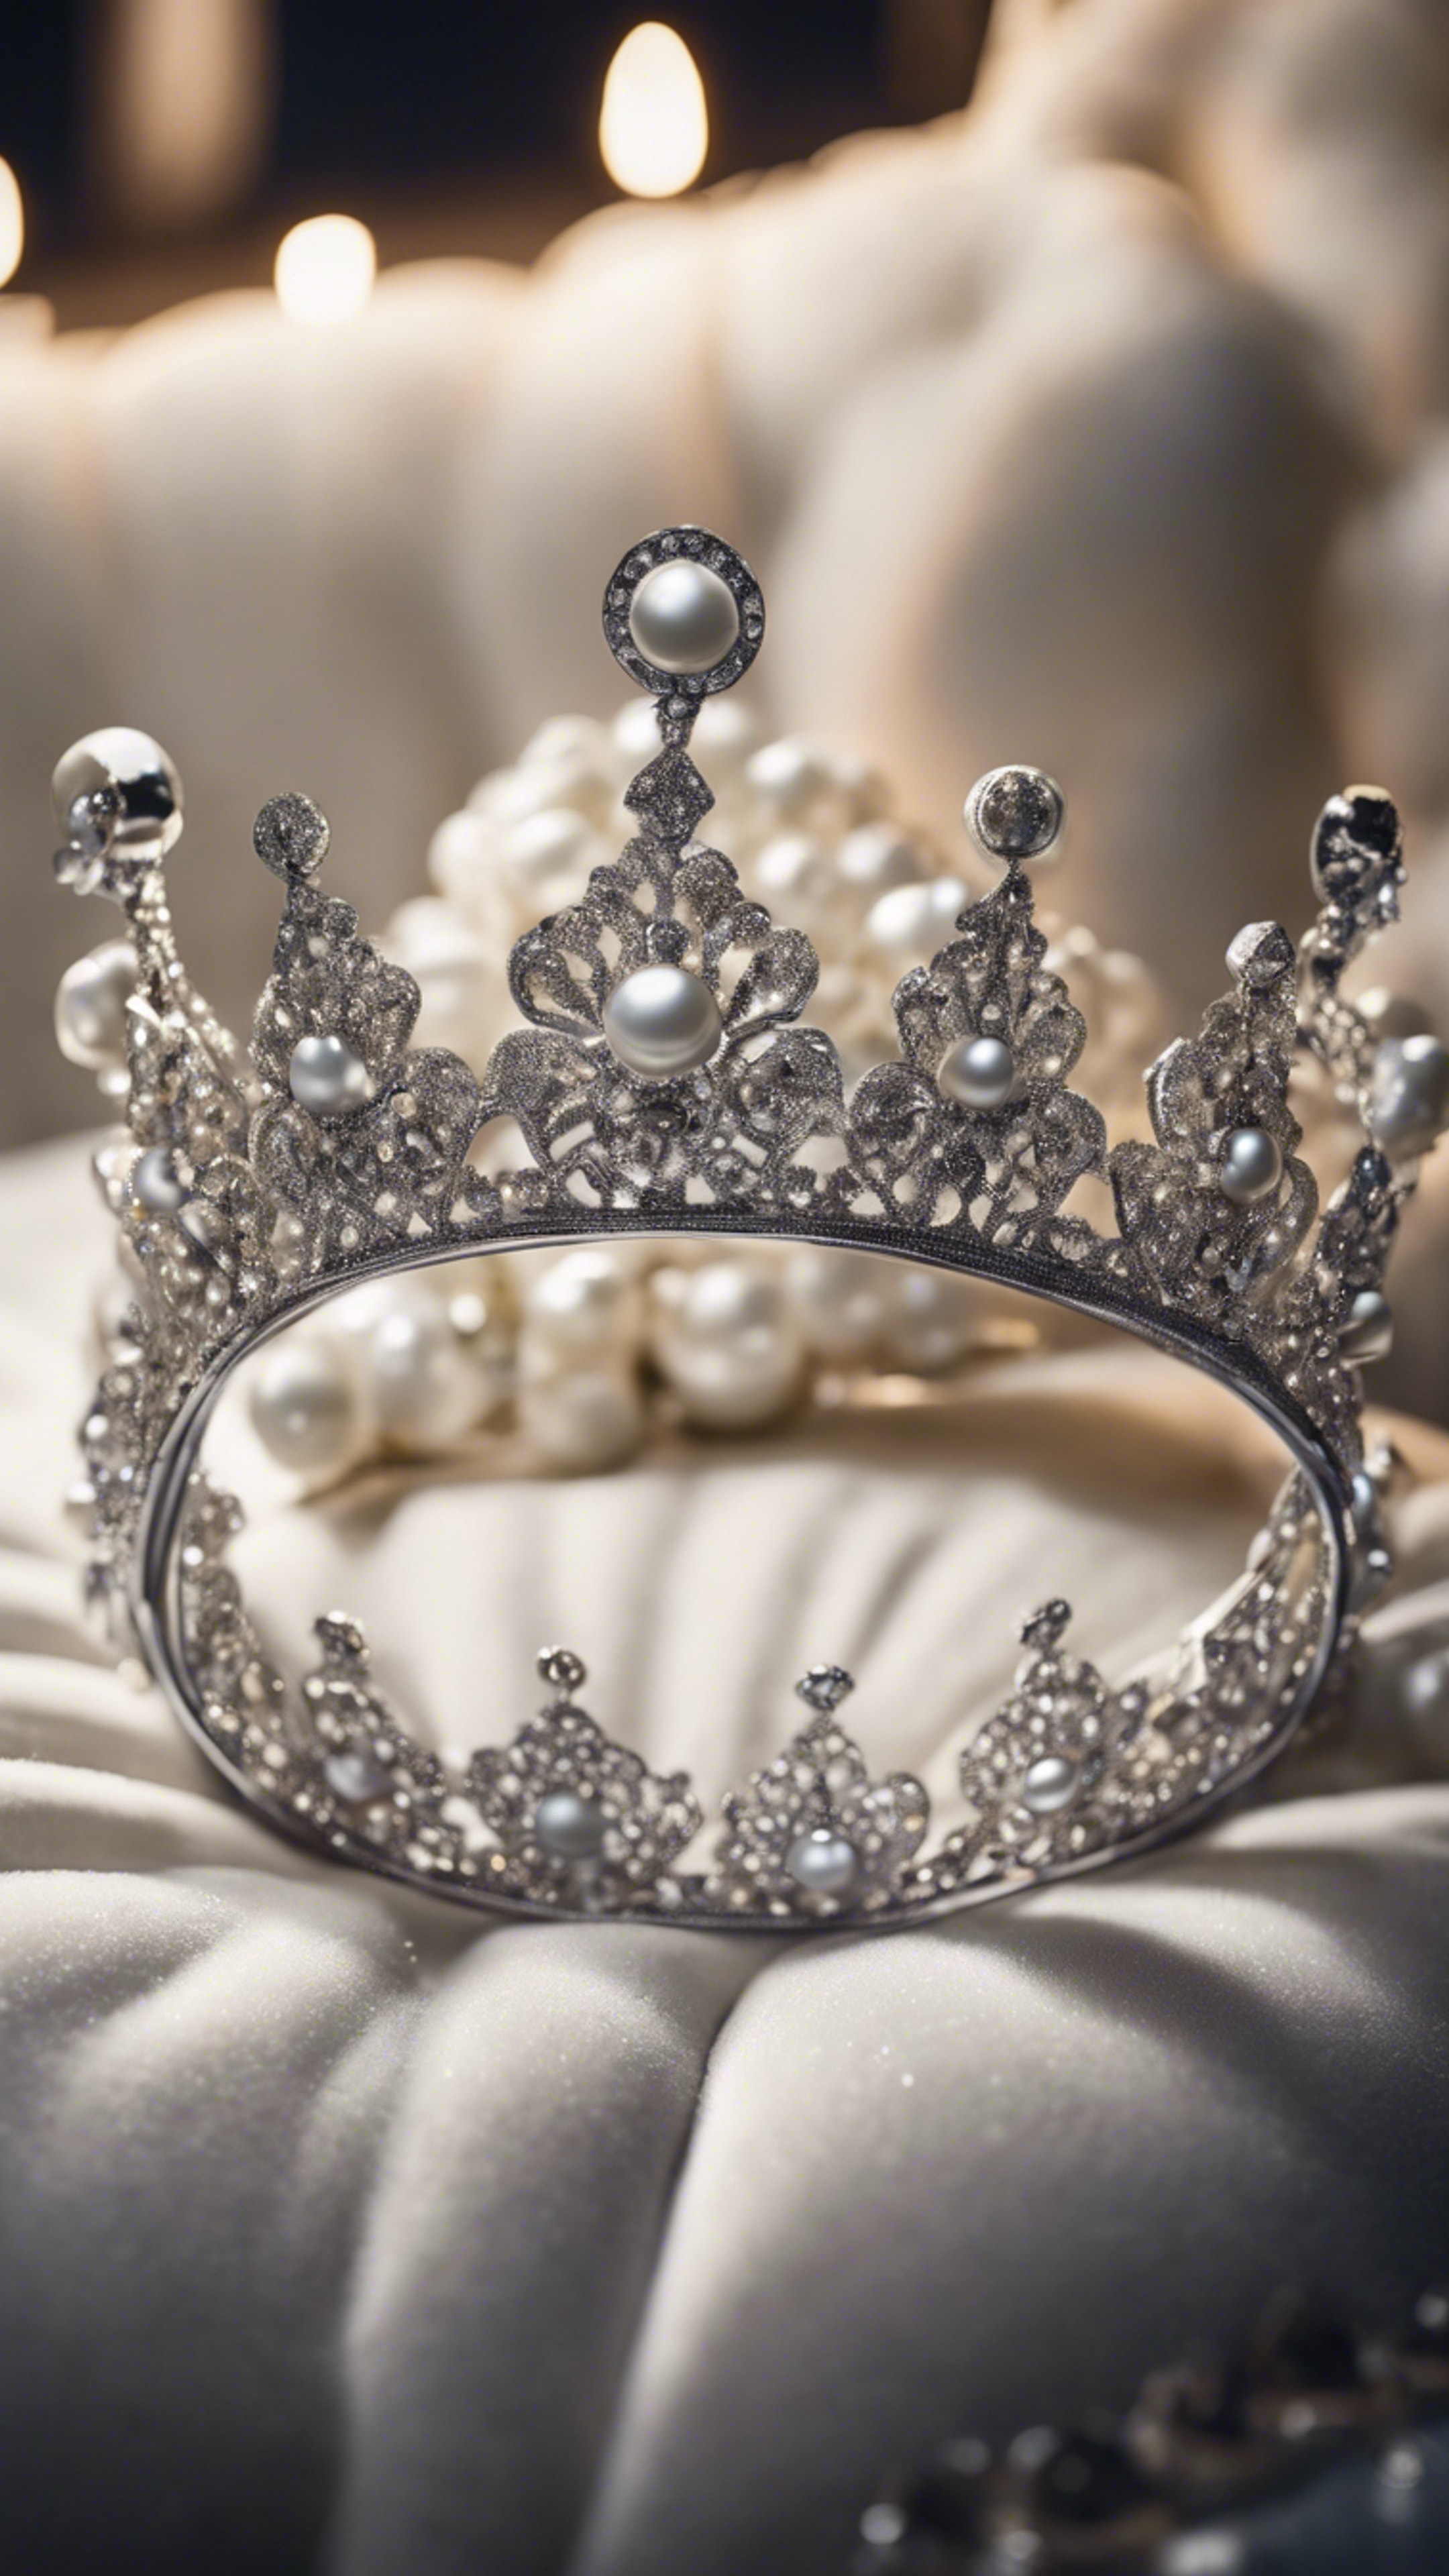 A classic silver crown embellished with pearls and diamonds lying on a white velvet cushion at night. Wallpaper[f90278dd6b1c4e9ca8cc]